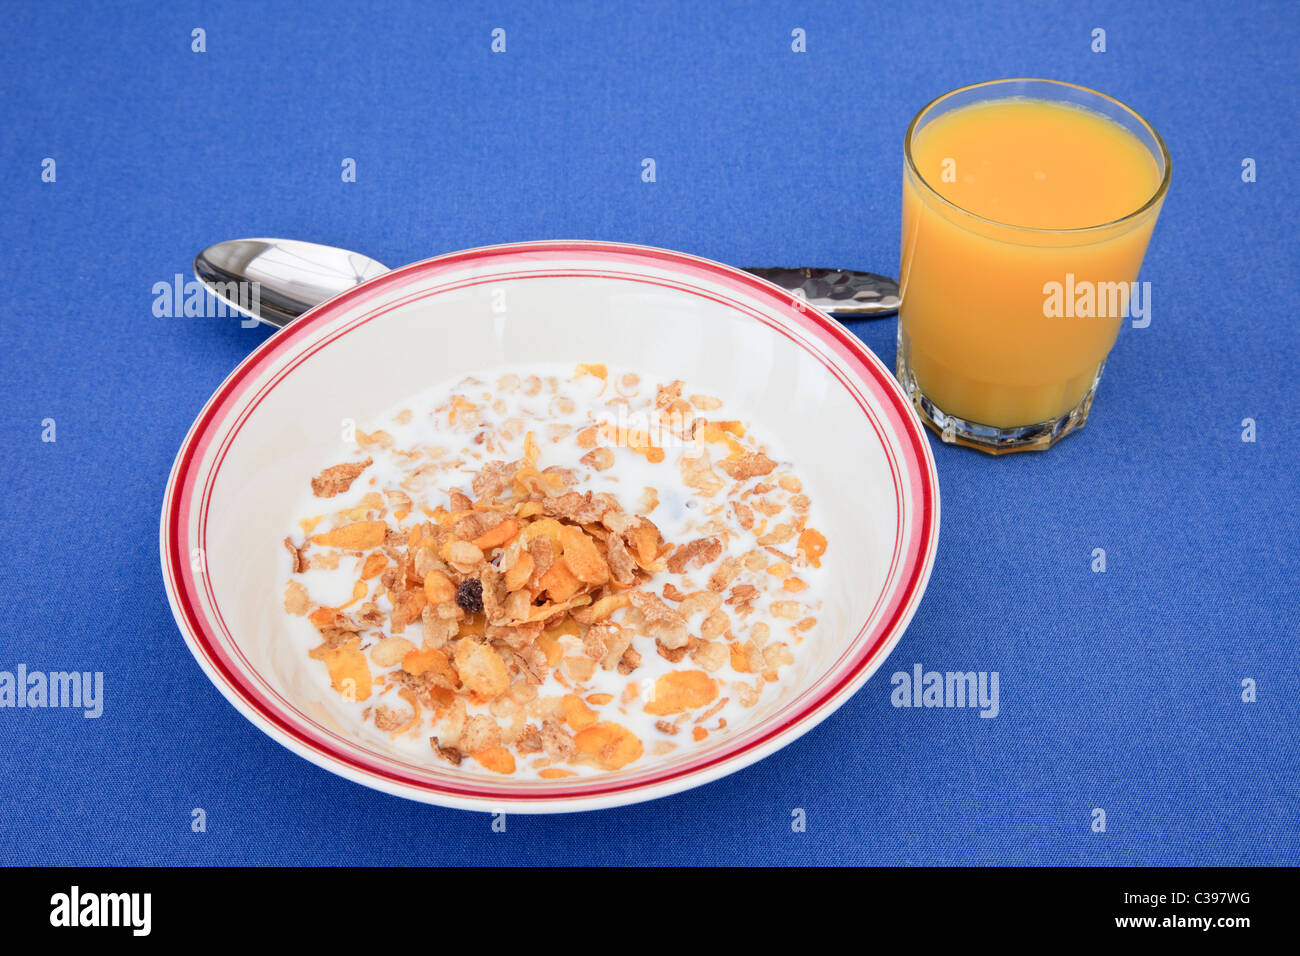 UK, Europe. Bowl of breakfast cereal and a glass of orange juice from above Stock Photo